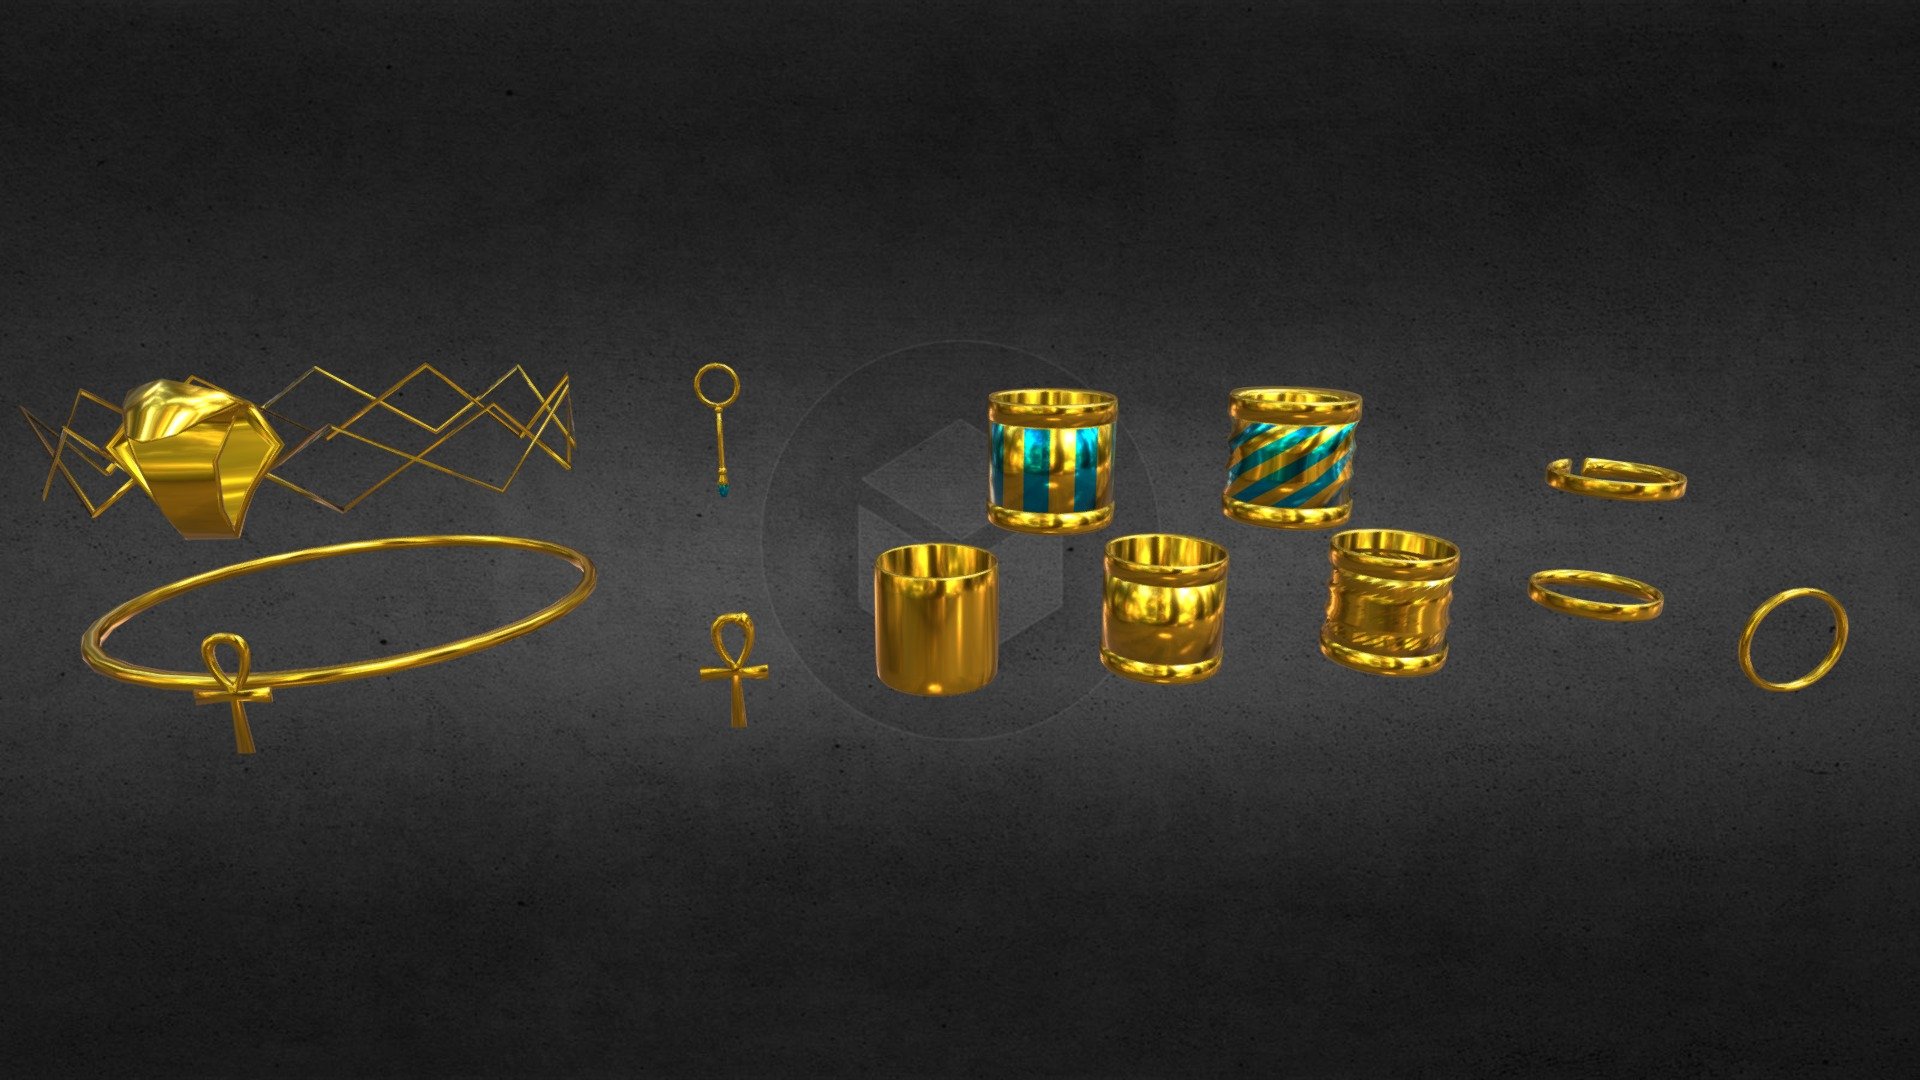 Egypt starter pack made in Blender.
The asset is fully customizable with different Blend Shapes to make it fully customizable. 
Some pieces come with bones so those can be rigged.
If you would like to get the model feel free to contact me. &lt;3 - Egypt starter pack - 3D model by LavinaHusky 3d model